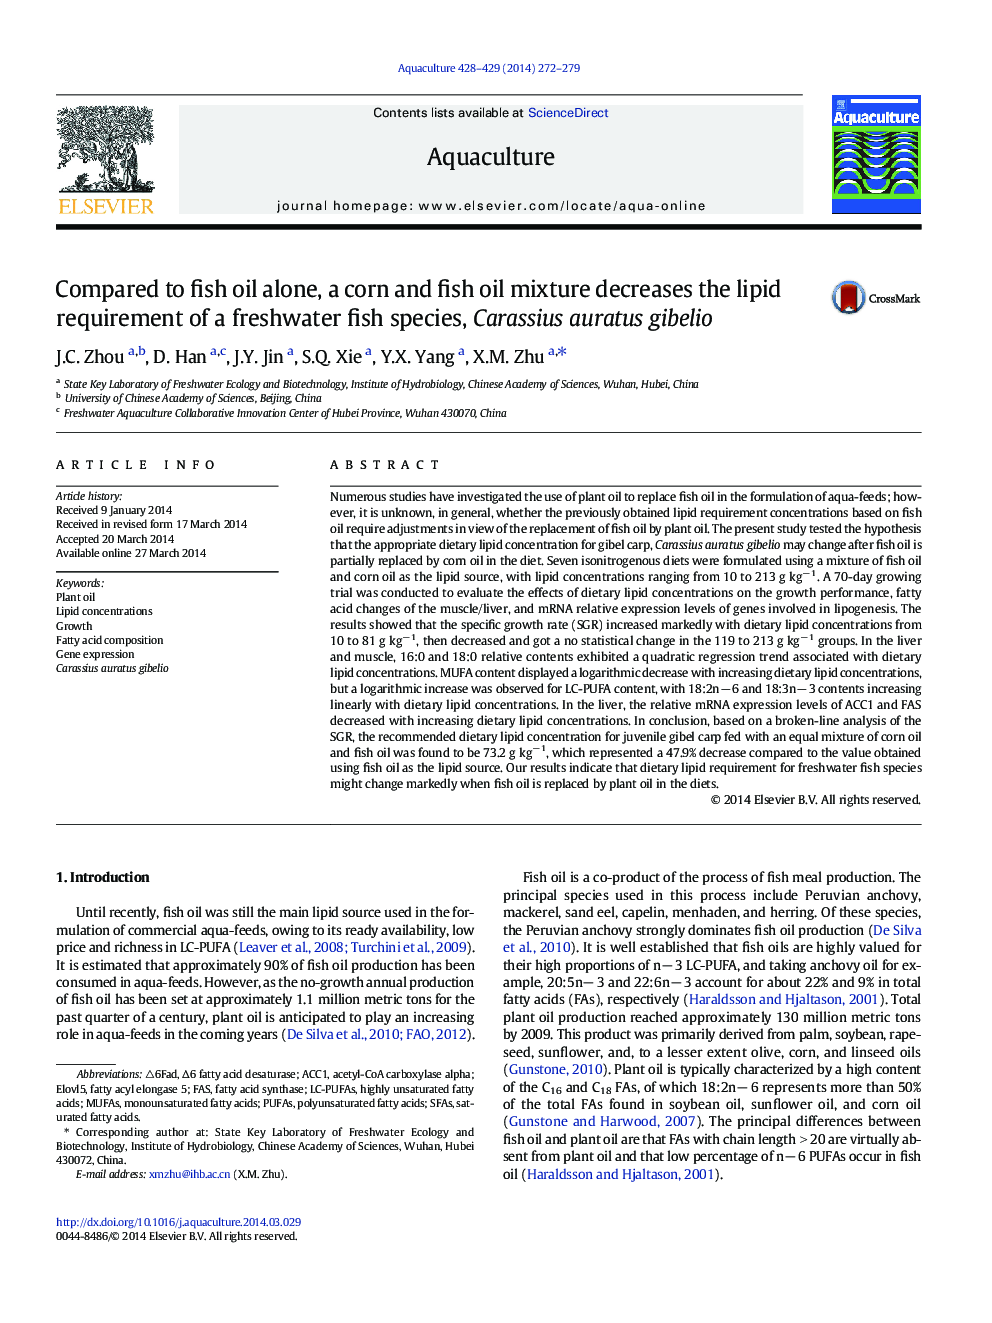 Compared to fish oil alone, a corn and fish oil mixture decreases the lipid requirement of a freshwater fish species, Carassius auratus gibelio